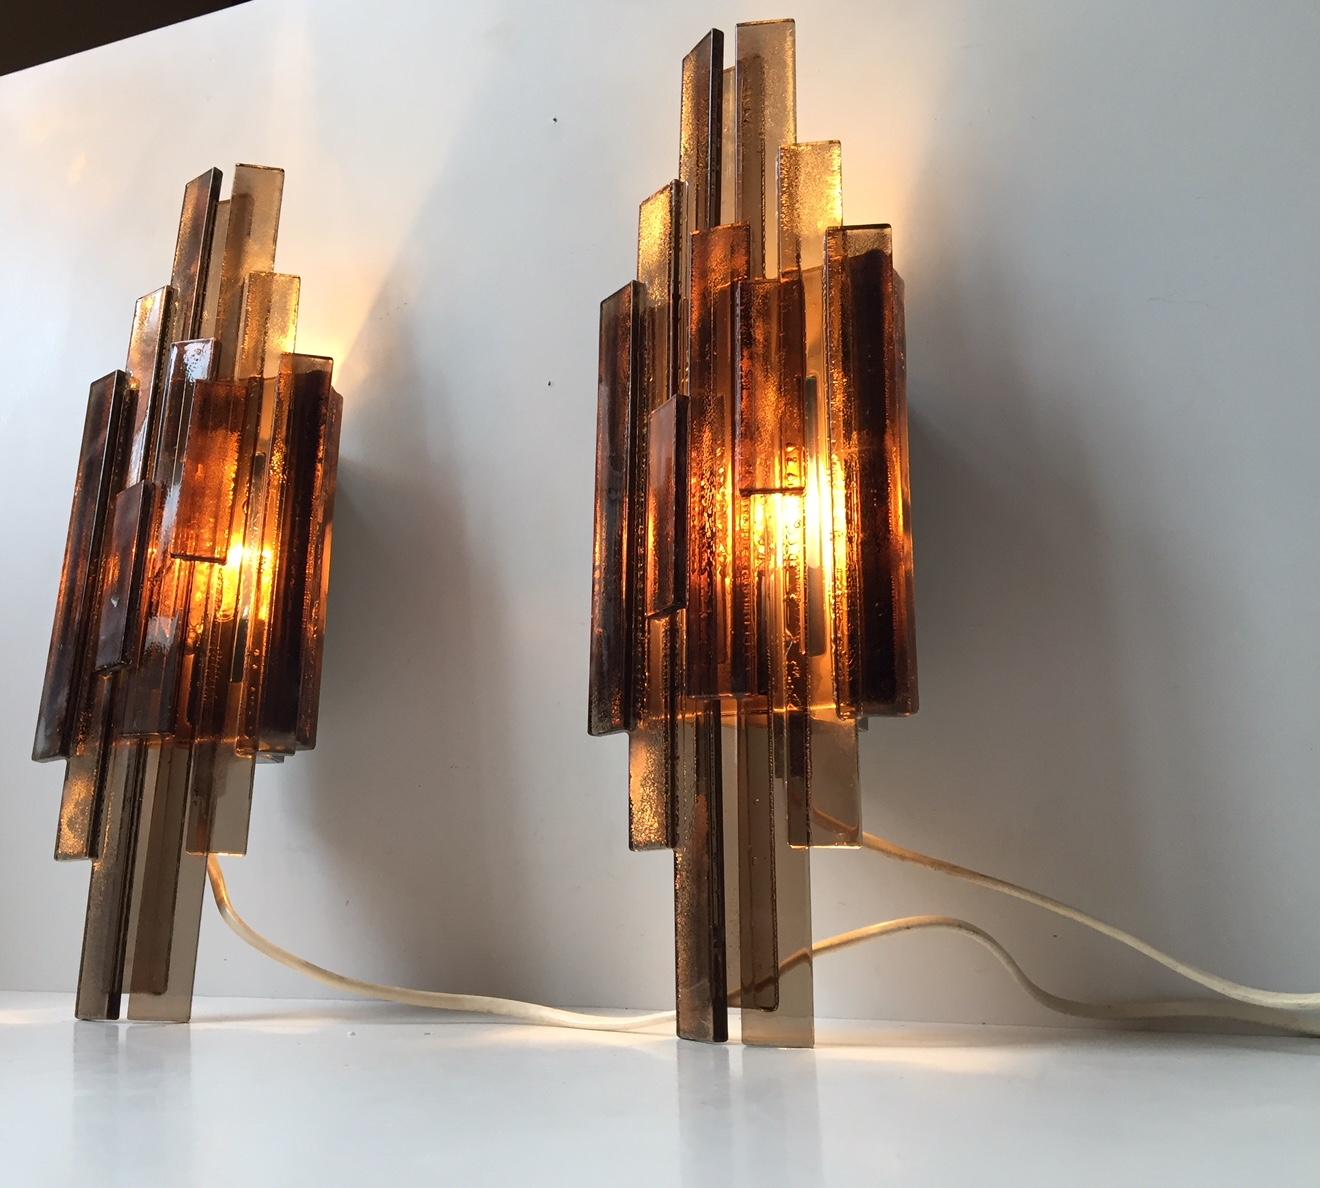 This pair of wall lamps was designed by Claus Bolby and manufactured by his own lighting company Cebo Industri of Silkeborg, Denmark in the late 1960s-early 1970s. The lamps have been constructed from layered strips of smoke-grey acrylic resin. The